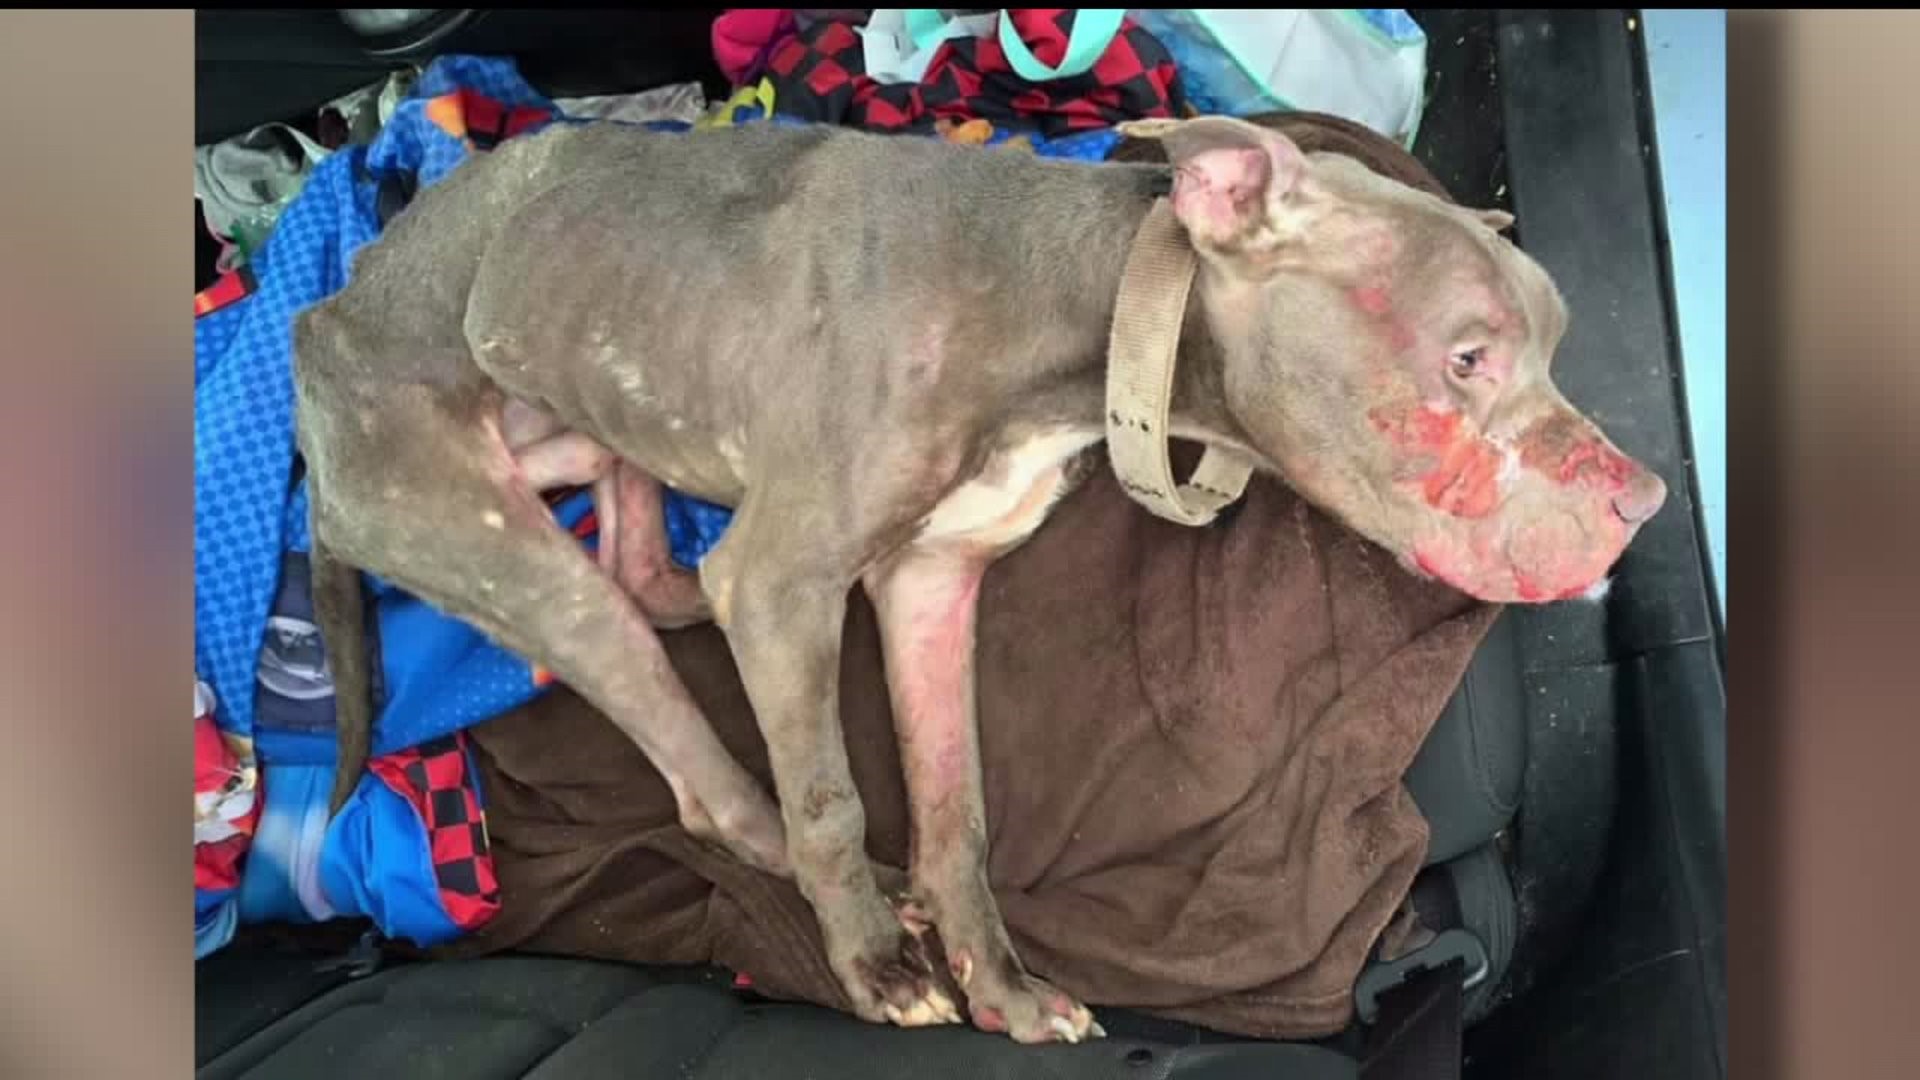 Reward increases to $3,000 for information on abused dog